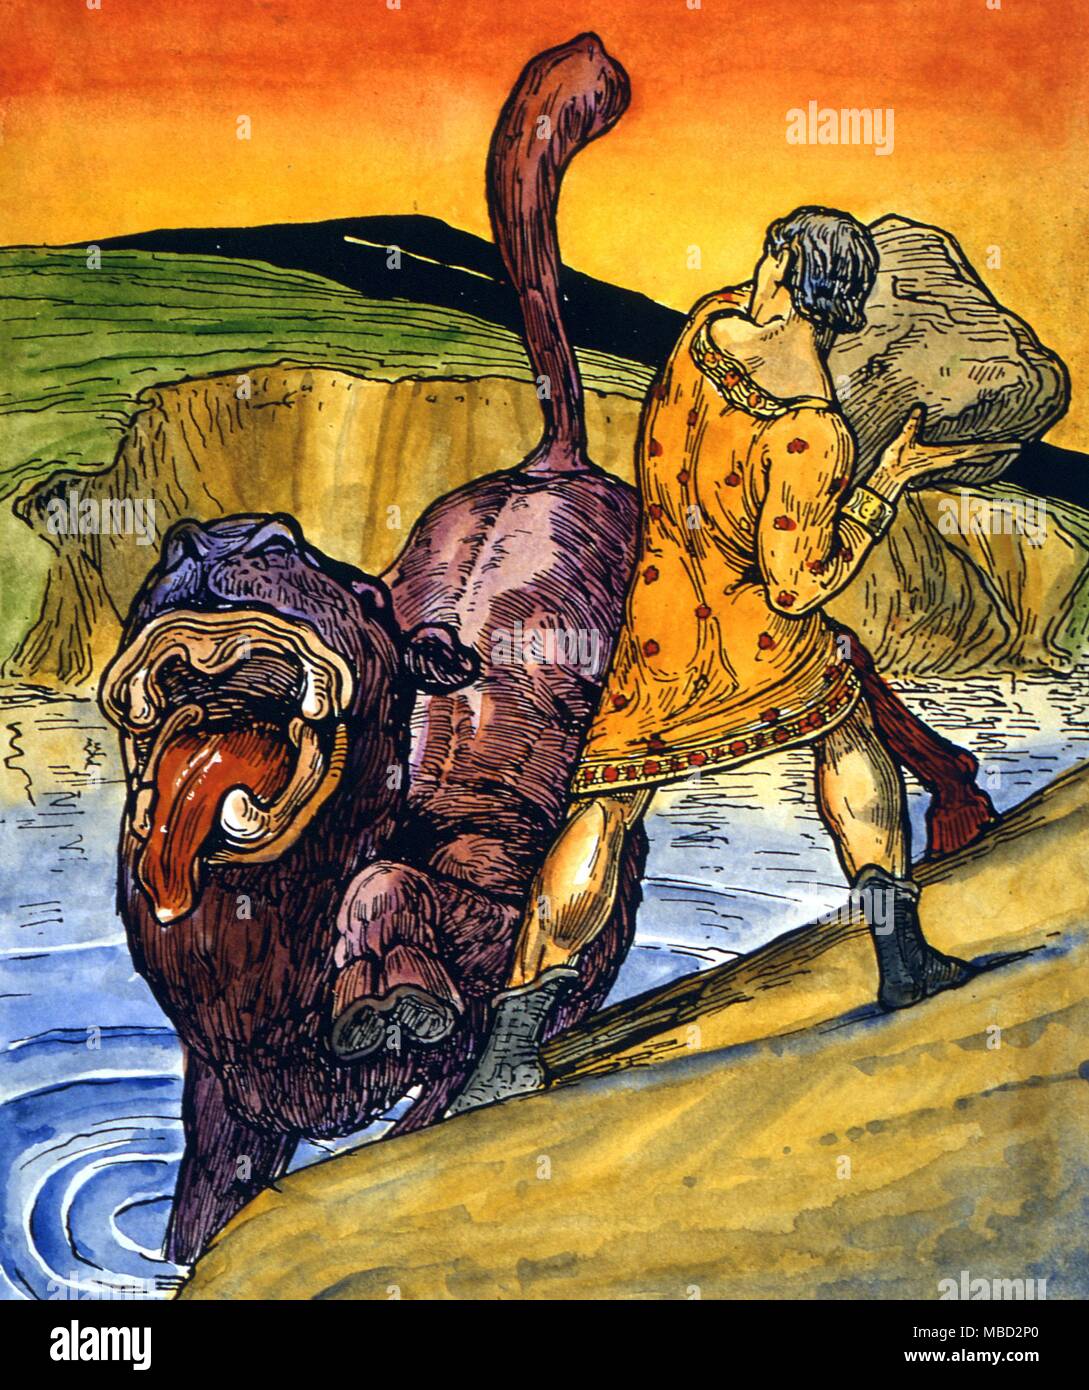 Monsters- Leucocrote. The yellow knight, Auriol, meets the monstrous Leucocrote. Illustration by A.G.Macgregor to Charles Squire's 'The Wonderful World'. Stock Photo